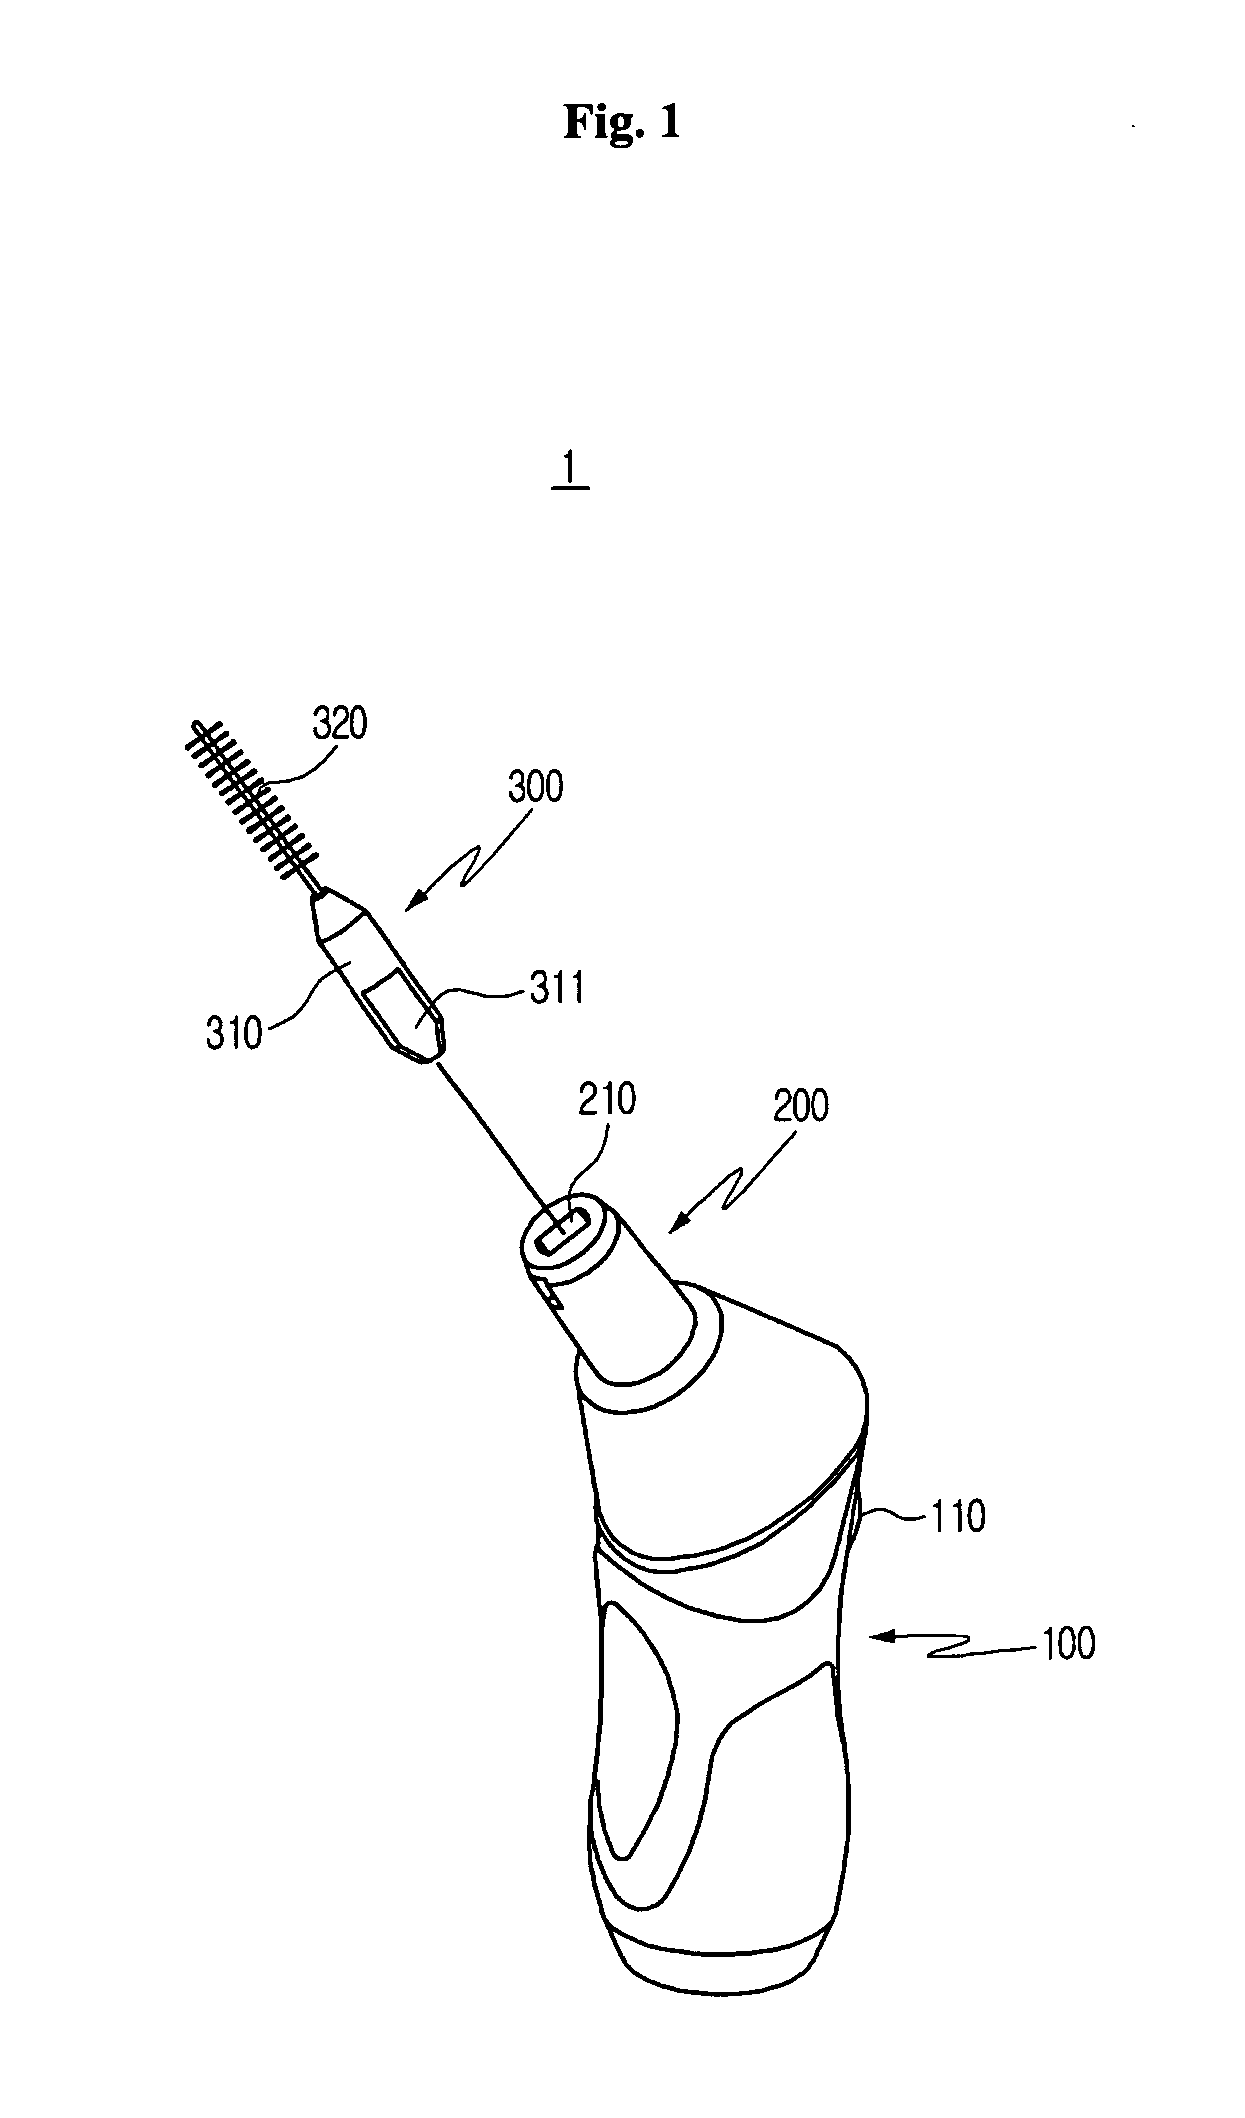 Automatic interdental cleaner